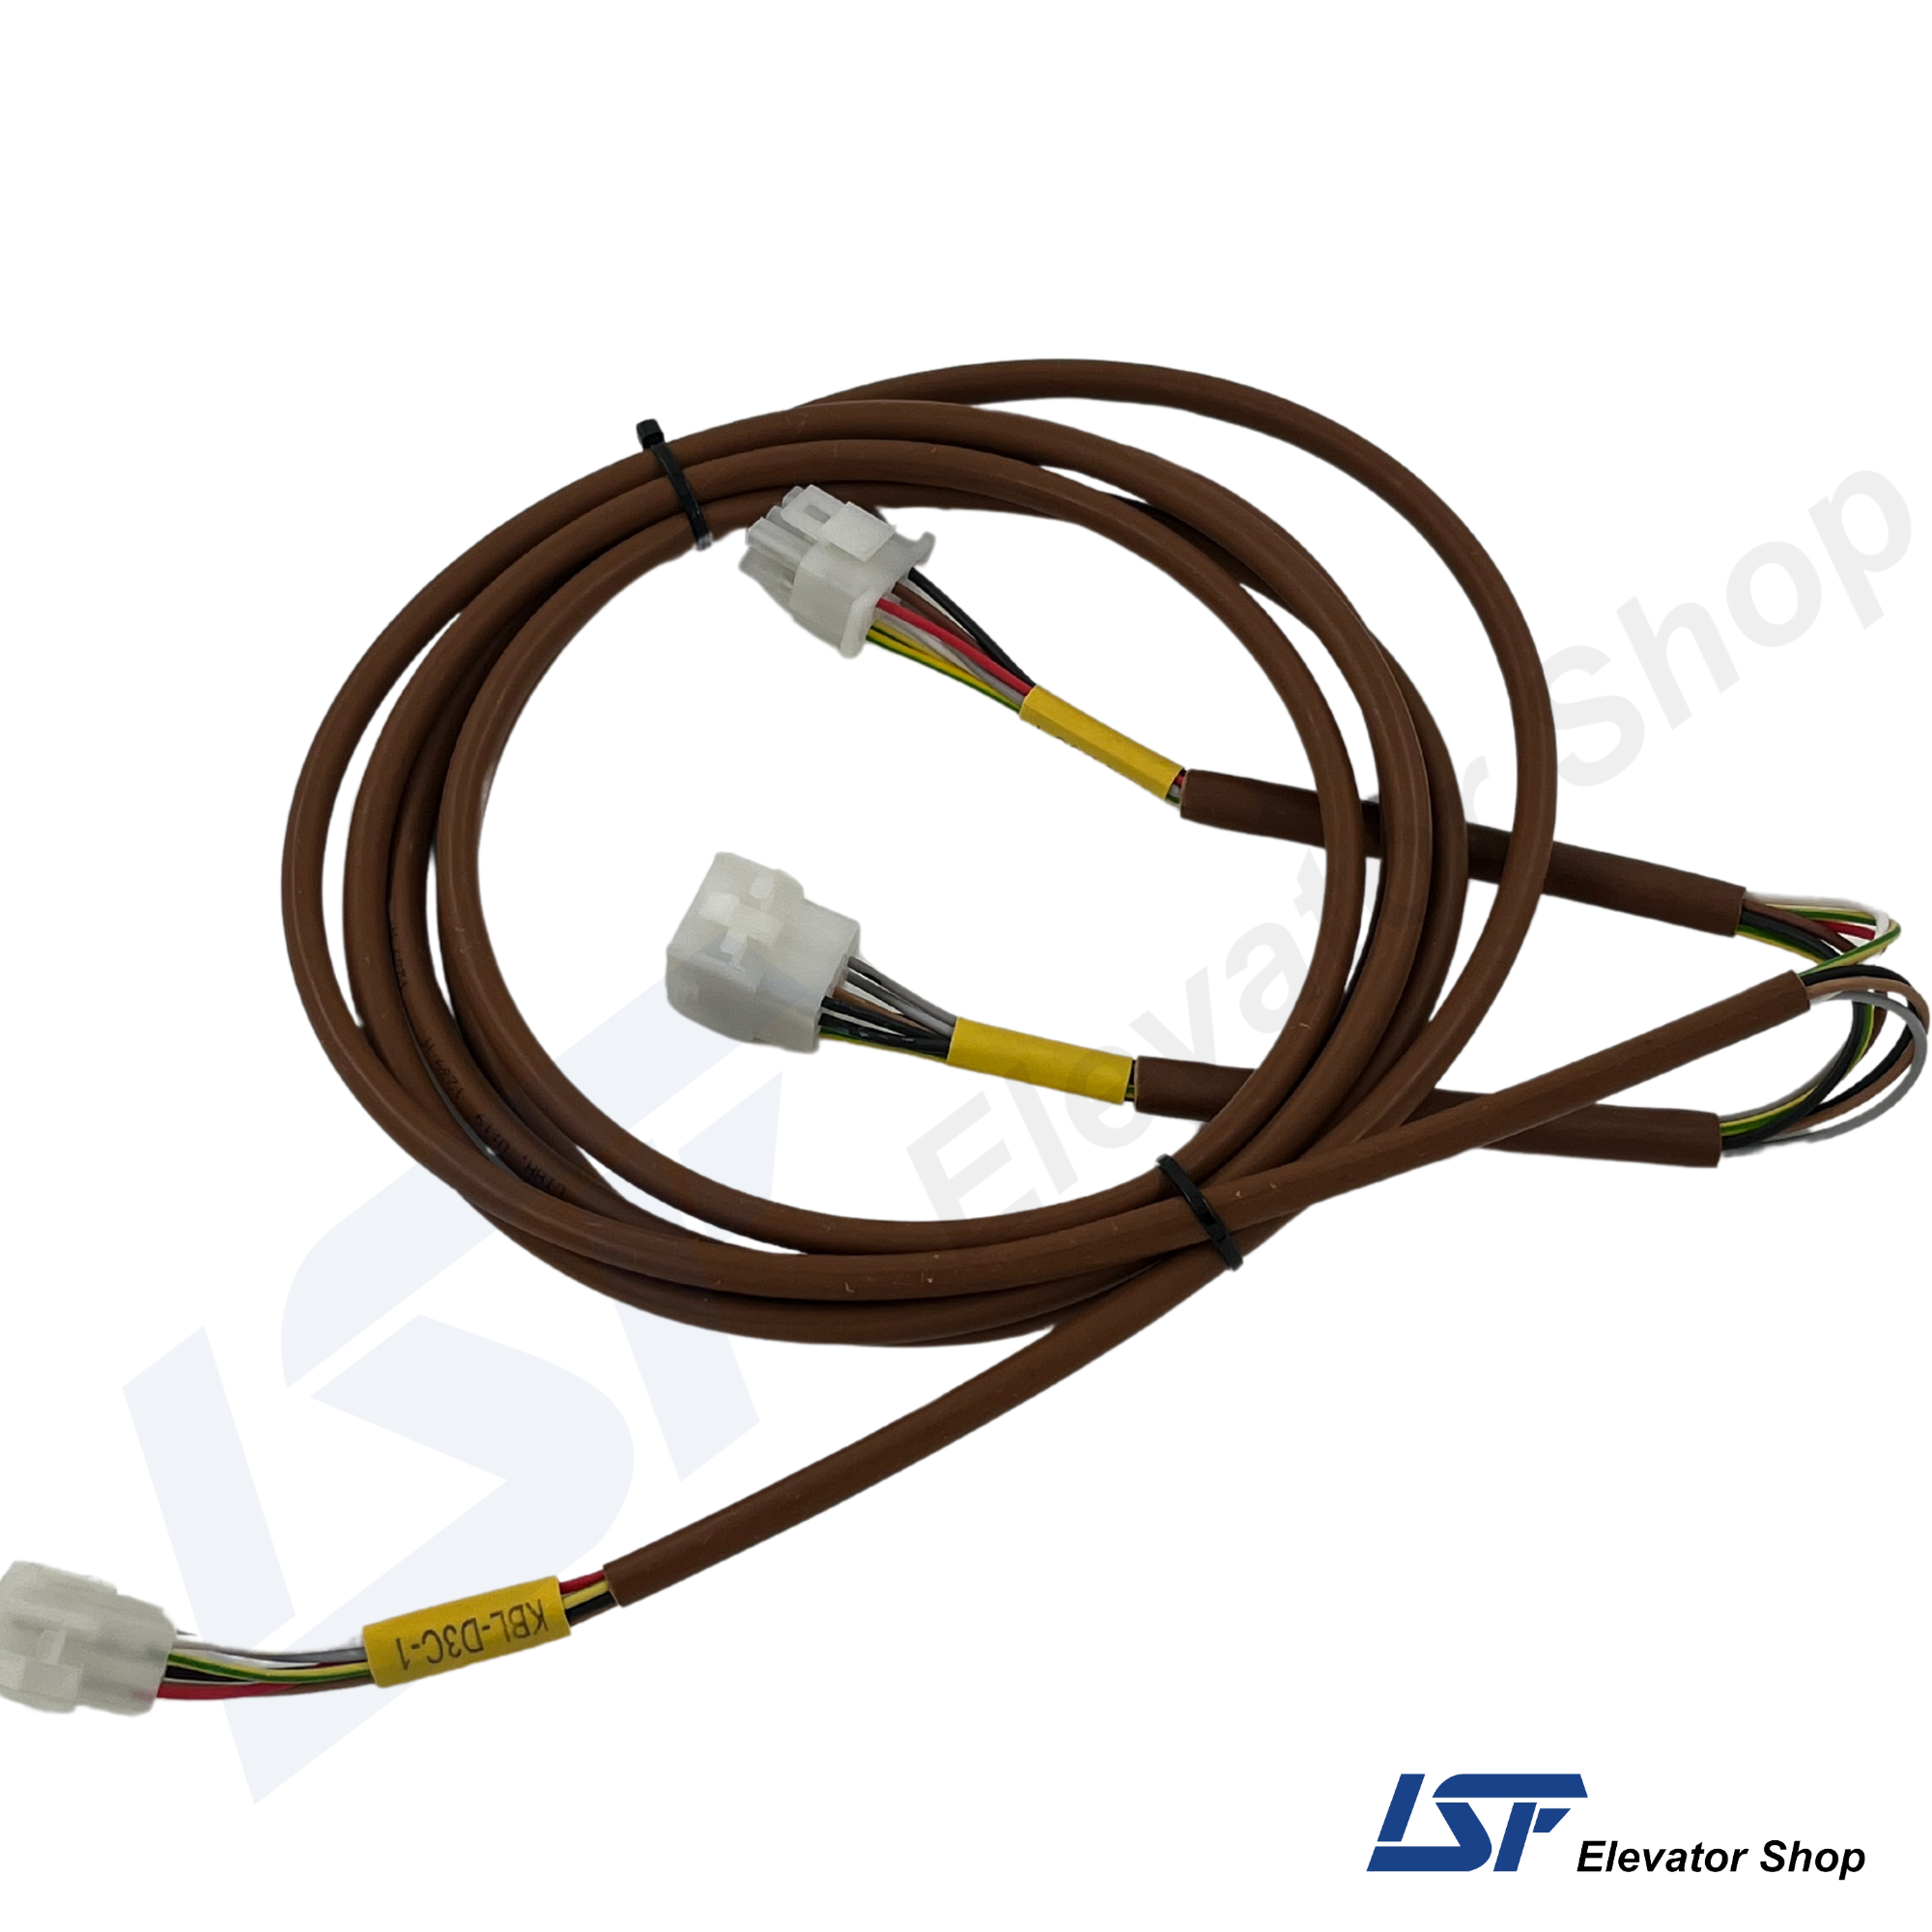 KBL-D3C-1 Arkel Door Contacts Cable 3,3m. for Elevator Systems (2)